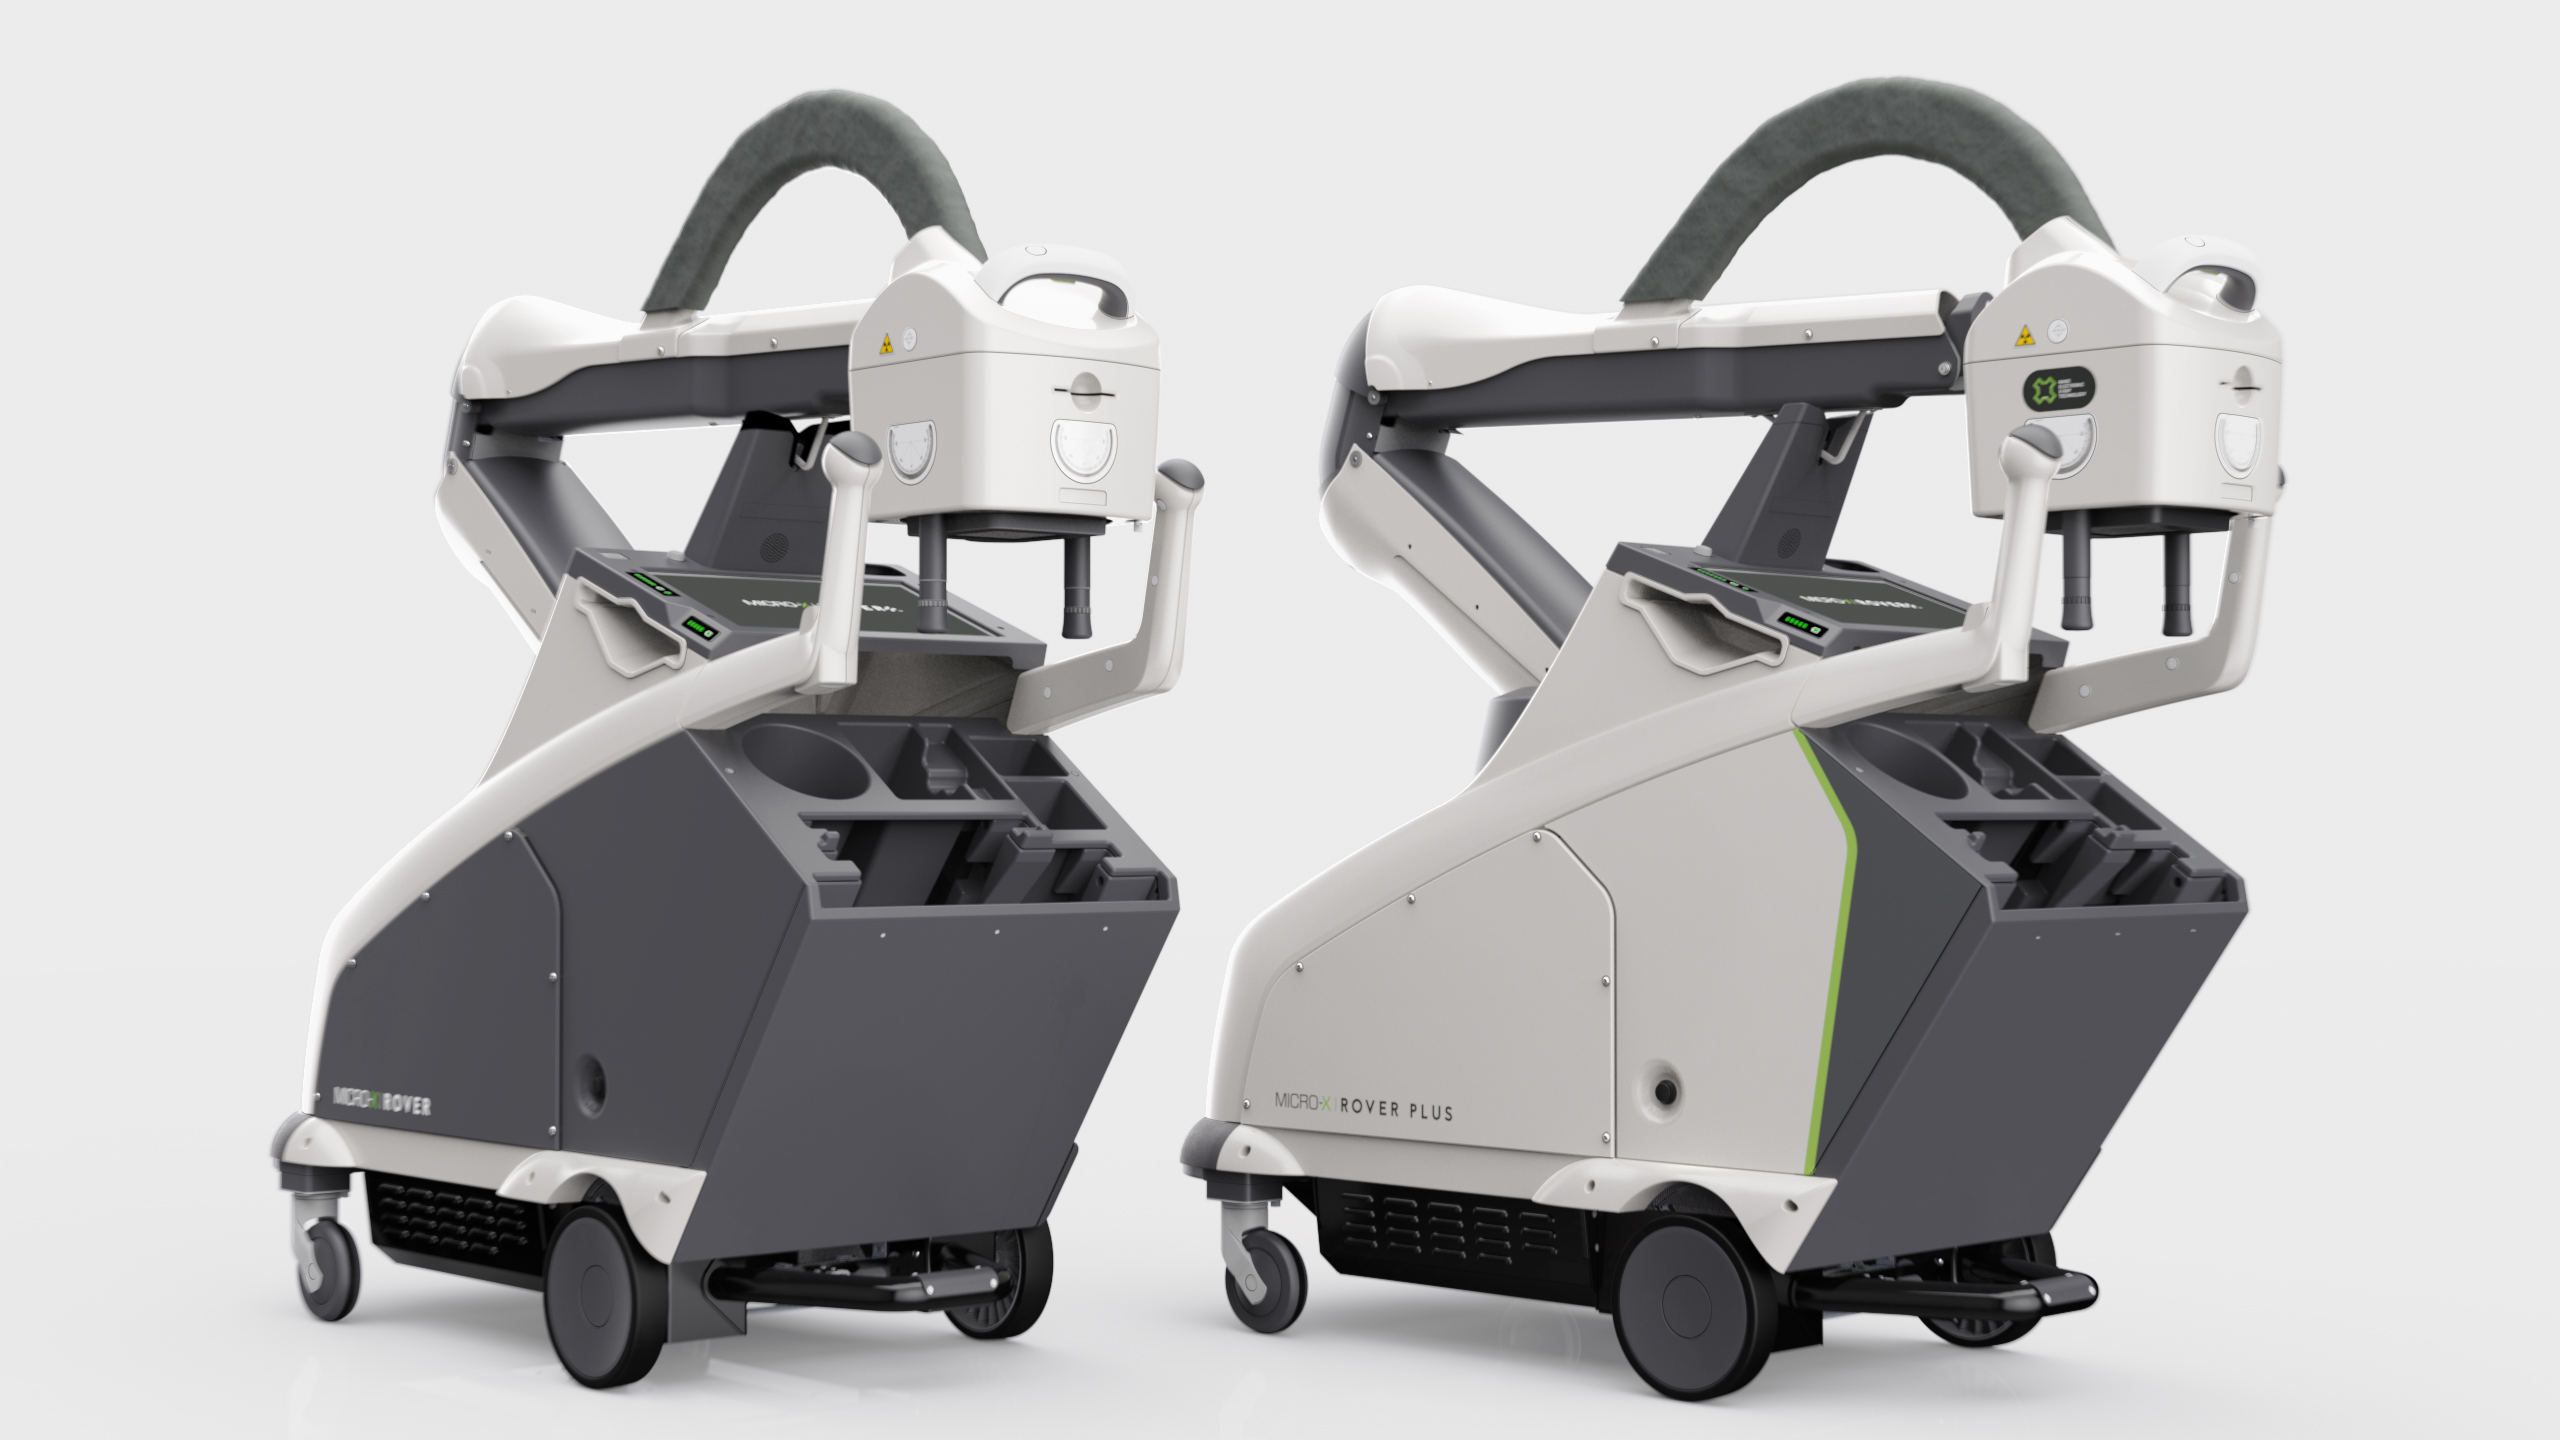 Micro-X Rover and next generation Rover Plus mobile x-ray